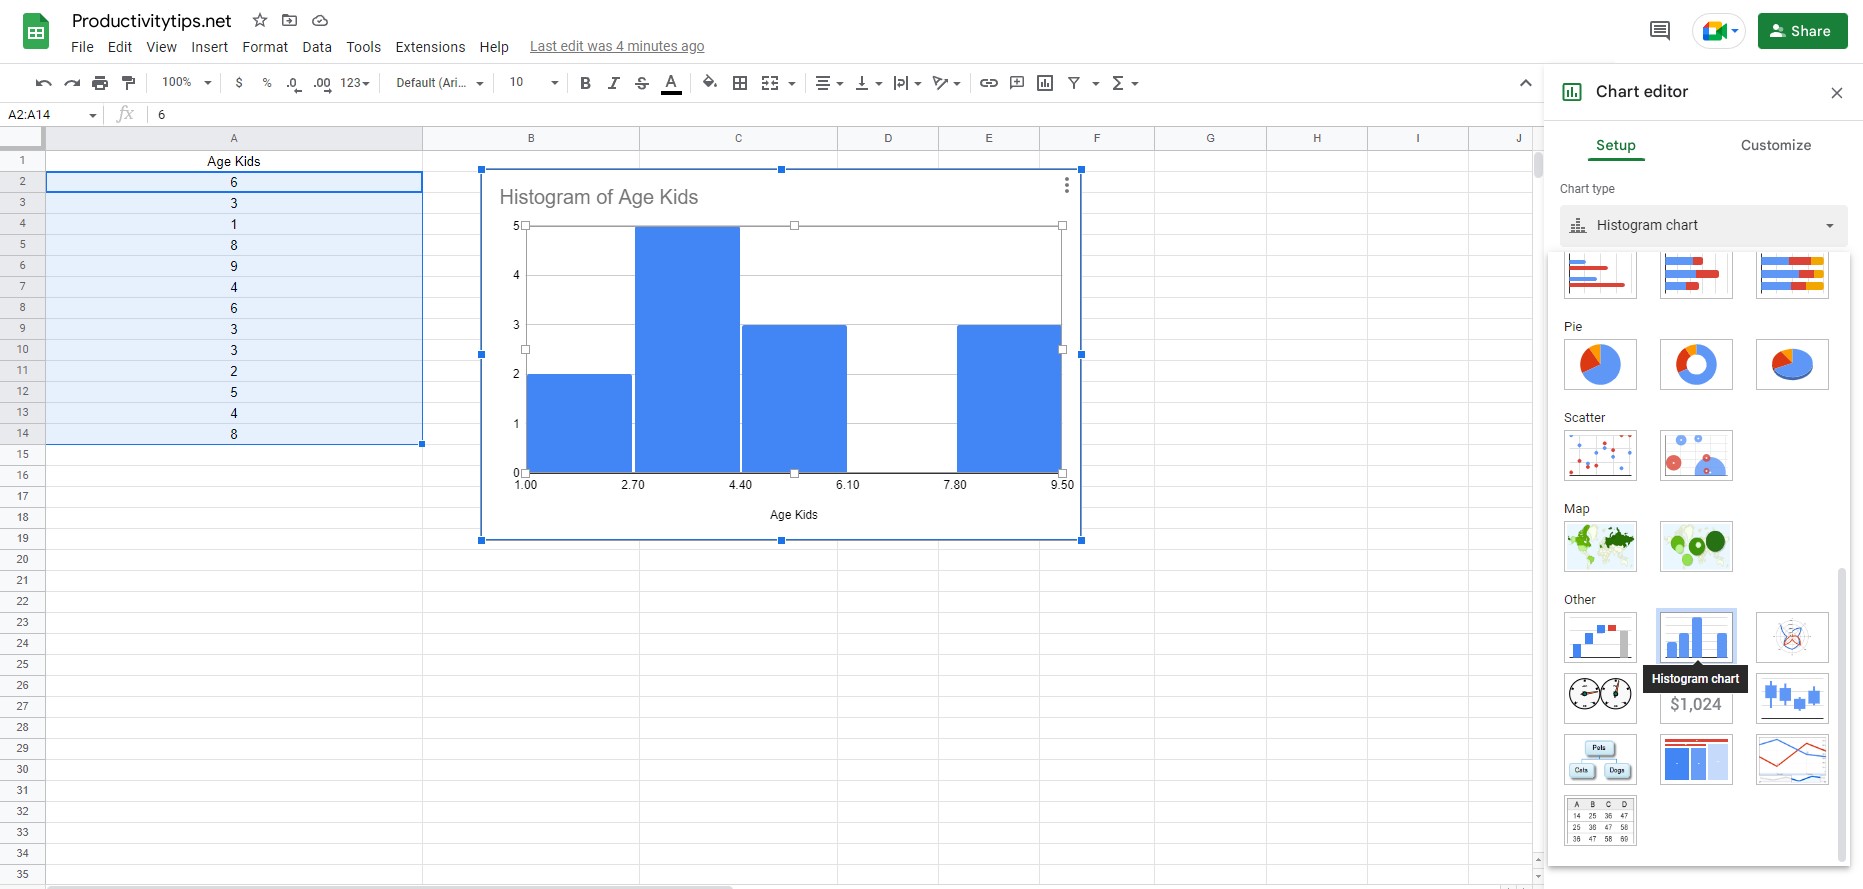 How To Make A Histogram In Google Sheets in 1 Minute?